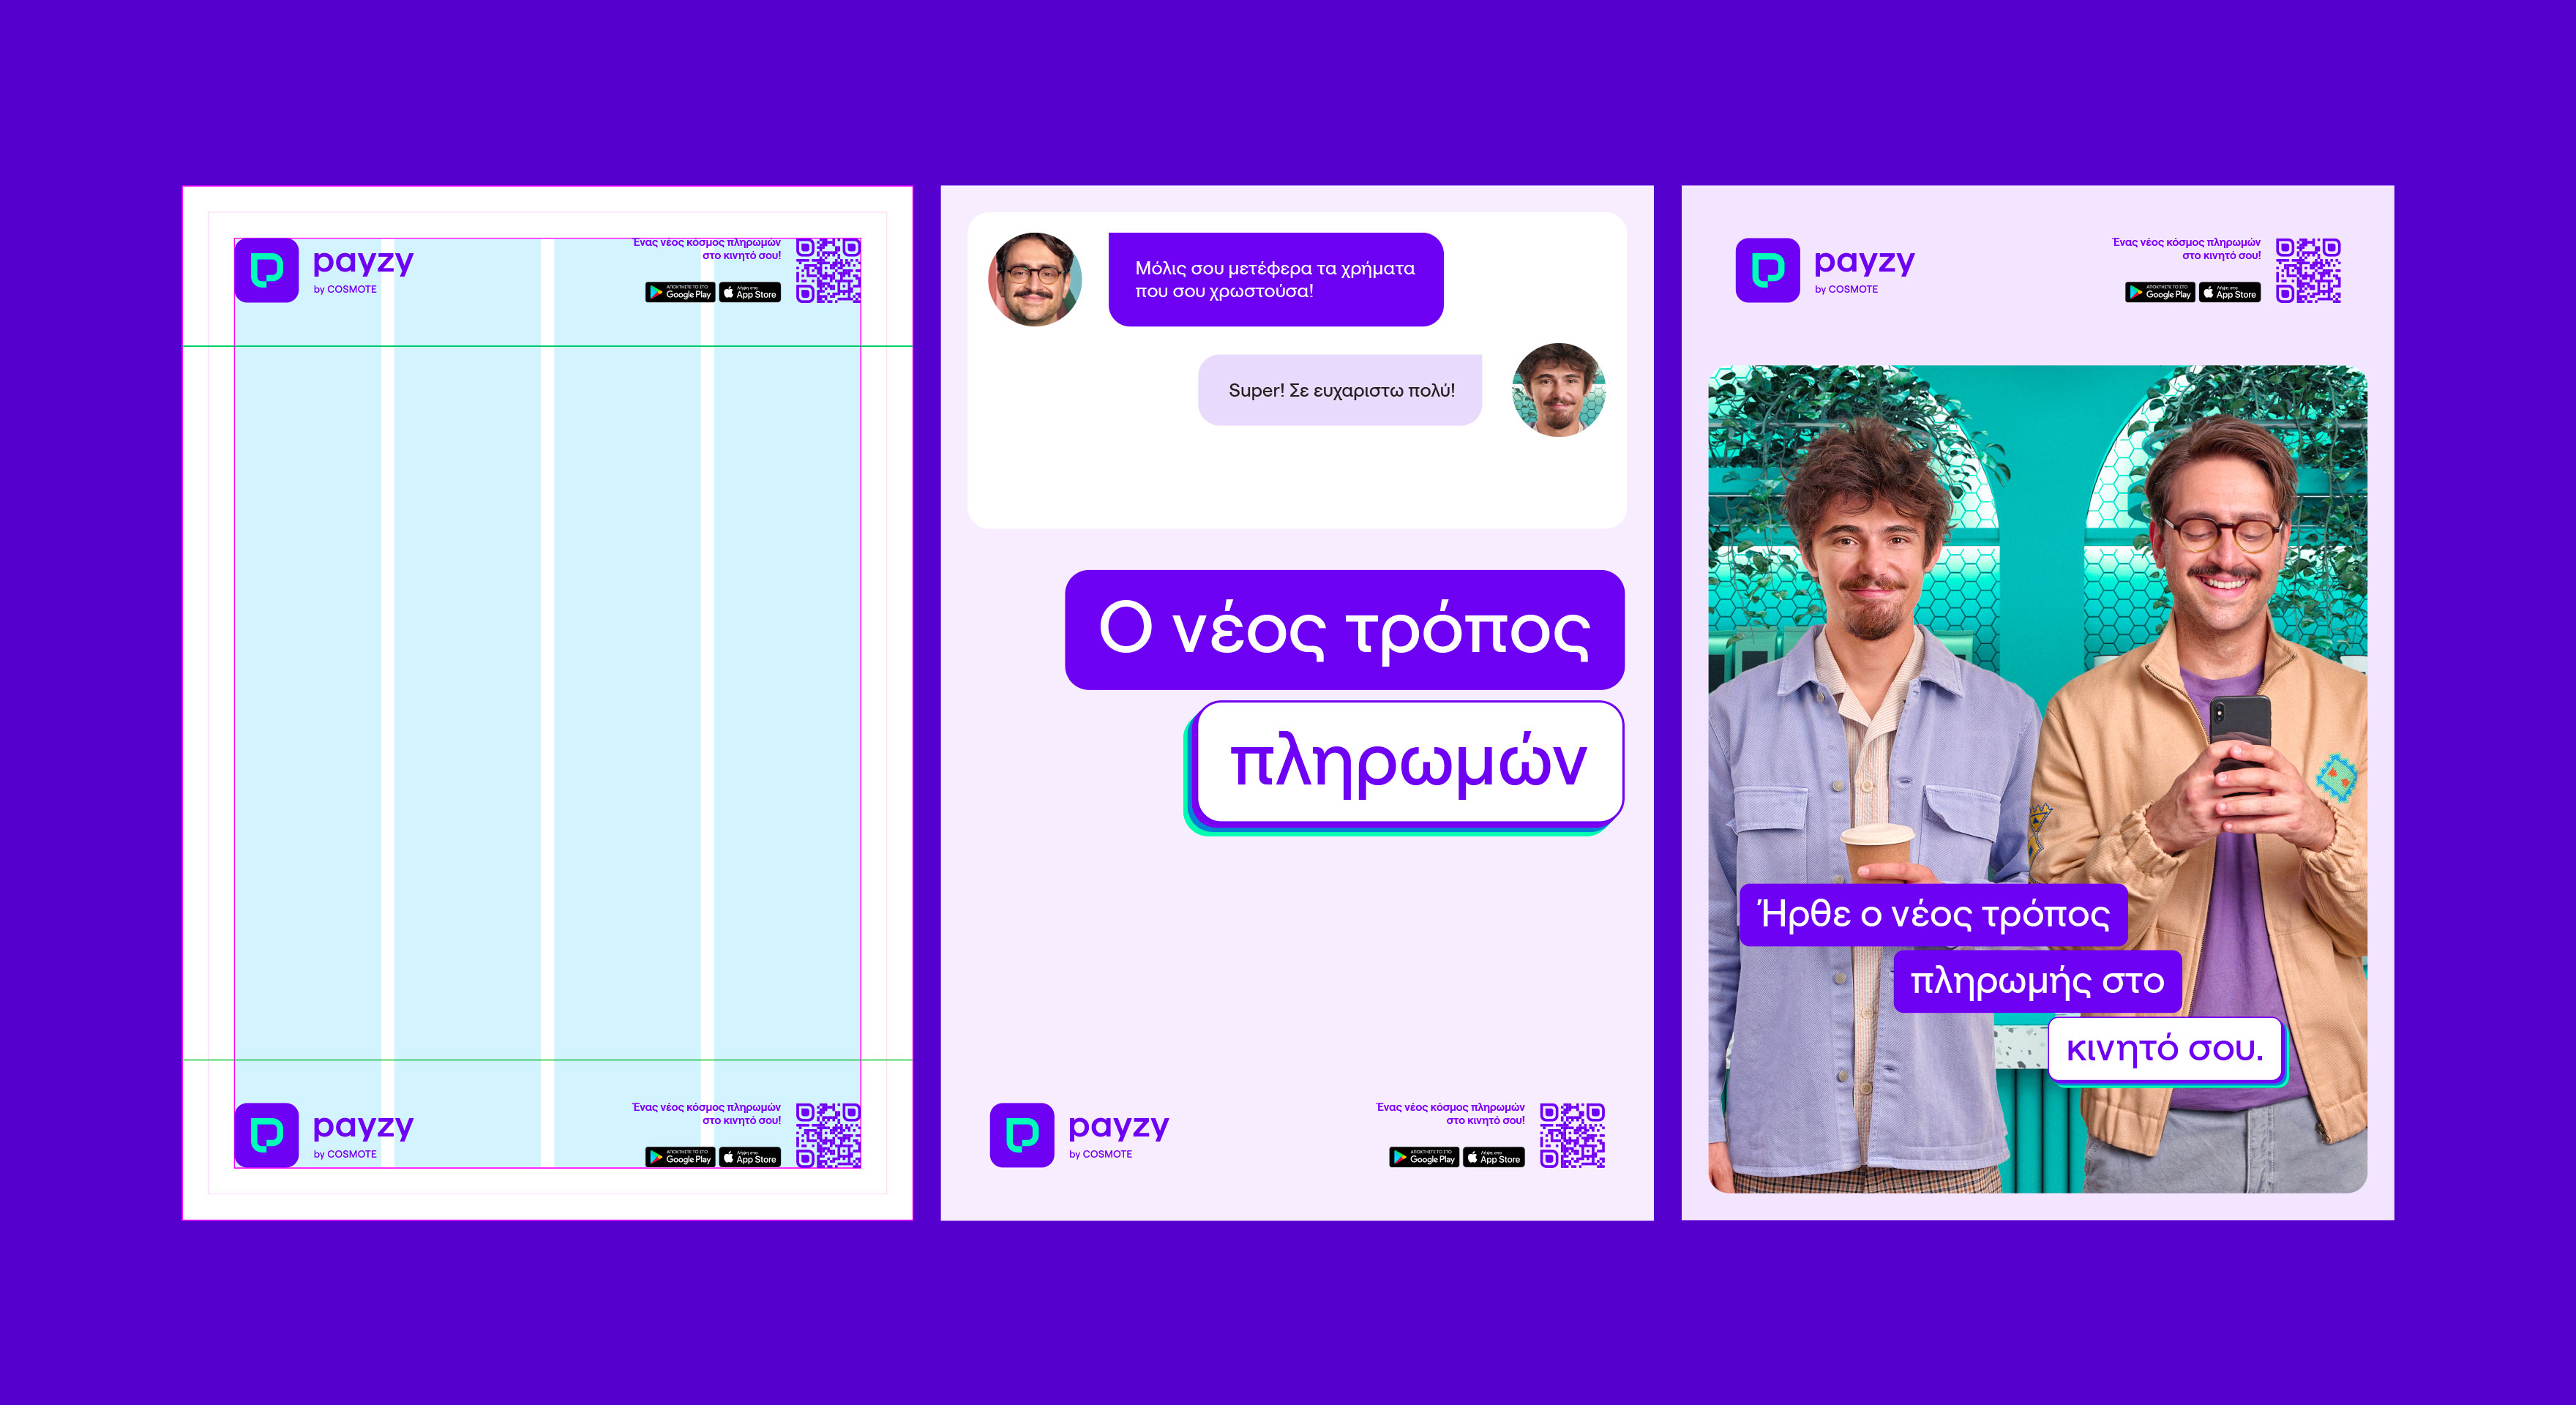 payzy cosmote branding ad kommigraphics